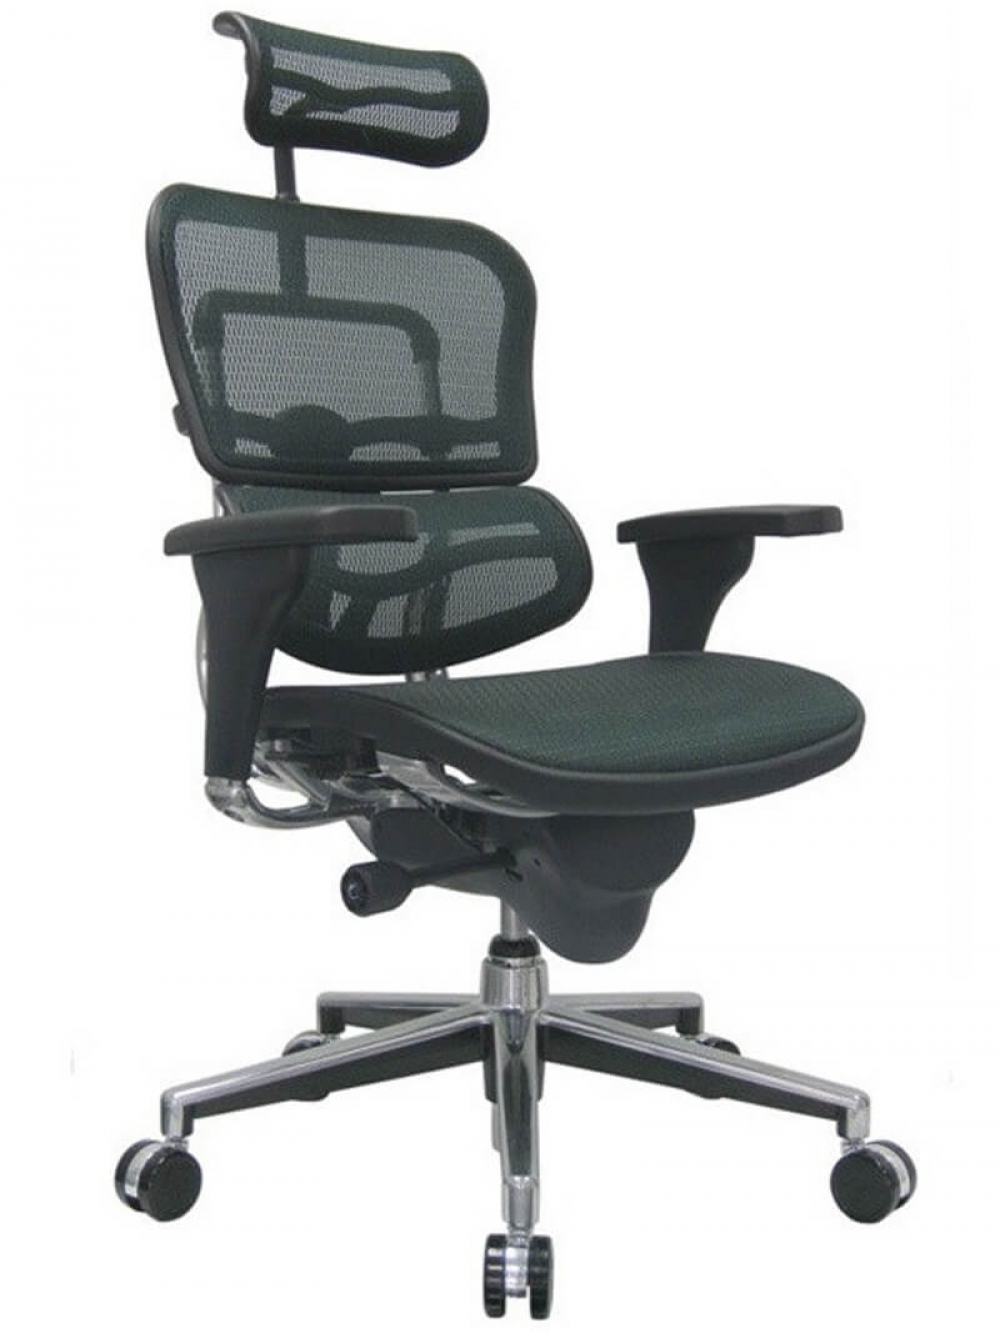 Executive chairs and conference chairs cub me7erg km 14 eur